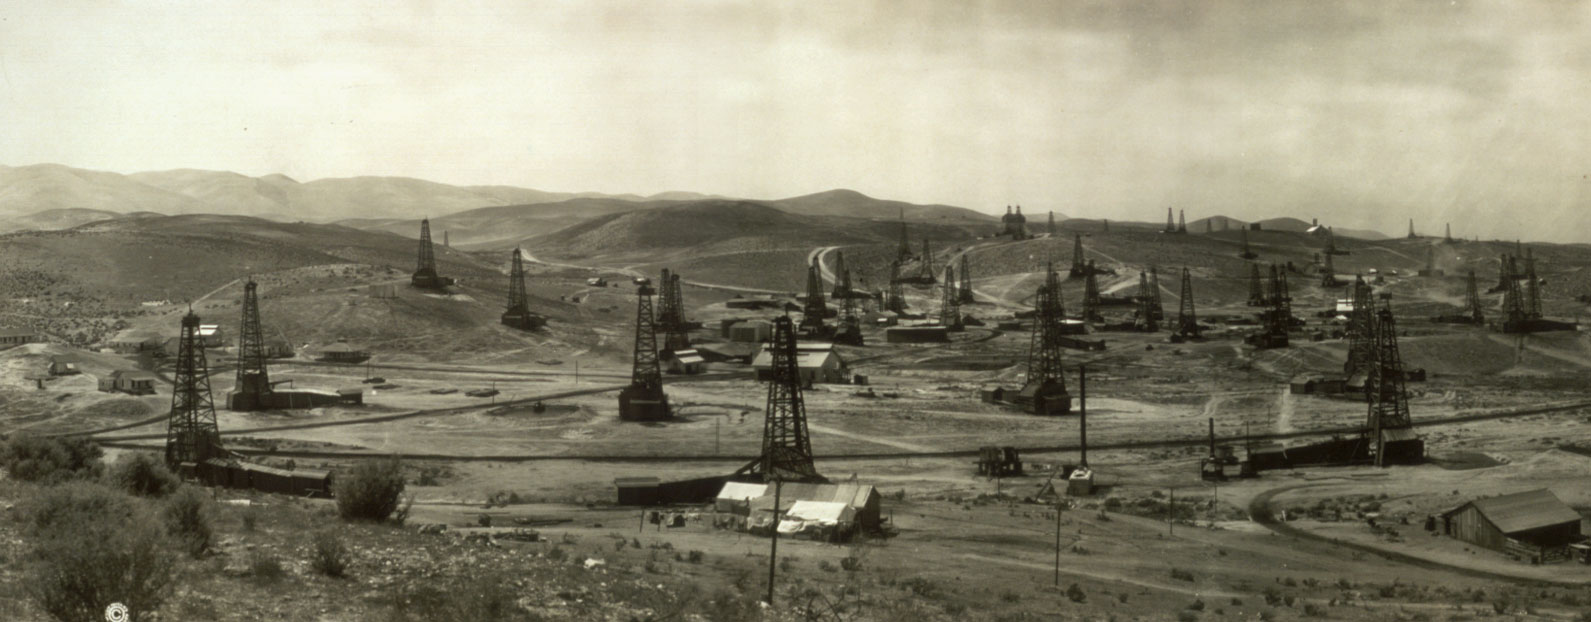 Black and white photograph of the San Francisco oil field ca. 1909. The photo shows a landscape of low-rolling hills. In the foreground is a developed area with multiple oil derricks.